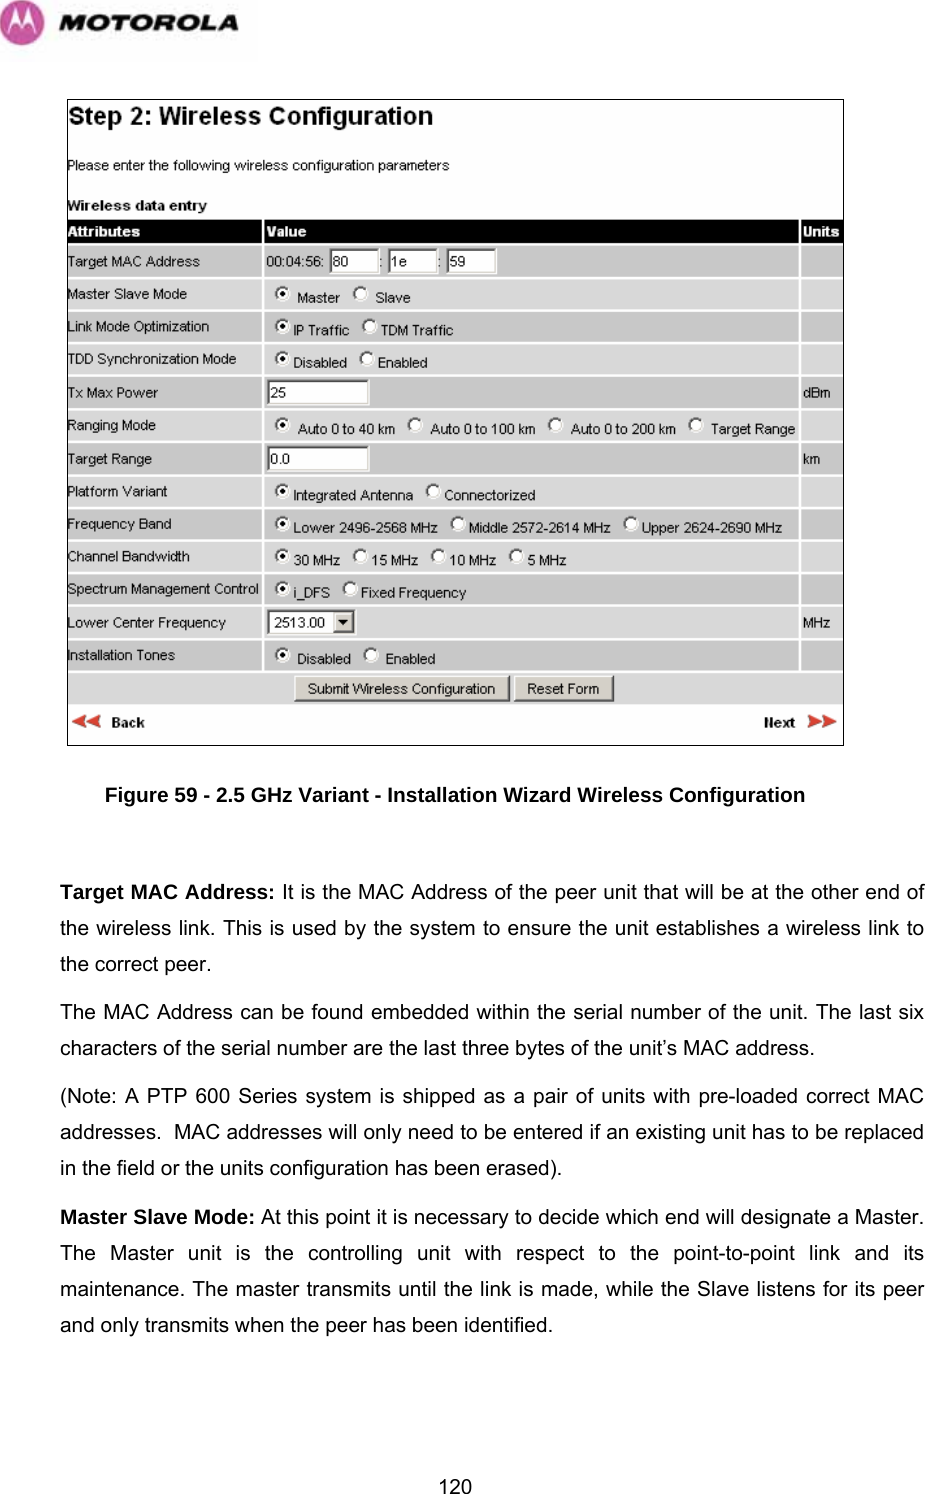   120 Figure 59 - 2.5 GHz Variant - Installation Wizard Wireless Configuration  Target MAC Address: It is the MAC Address of the peer unit that will be at the other end of the wireless link. This is used by the system to ensure the unit establishes a wireless link to the correct peer.  The MAC Address can be found embedded within the serial number of the unit. The last six characters of the serial number are the last three bytes of the unit’s MAC address. (Note: A PTP 600 Series system is shipped as a pair of units with pre-loaded correct MAC addresses.  MAC addresses will only need to be entered if an existing unit has to be replaced in the field or the units configuration has been erased). Master Slave Mode: At this point it is necessary to decide which end will designate a Master. The Master unit is the controlling unit with respect to the point-to-point link and its maintenance. The master transmits until the link is made, while the Slave listens for its peer and only transmits when the peer has been identified.  